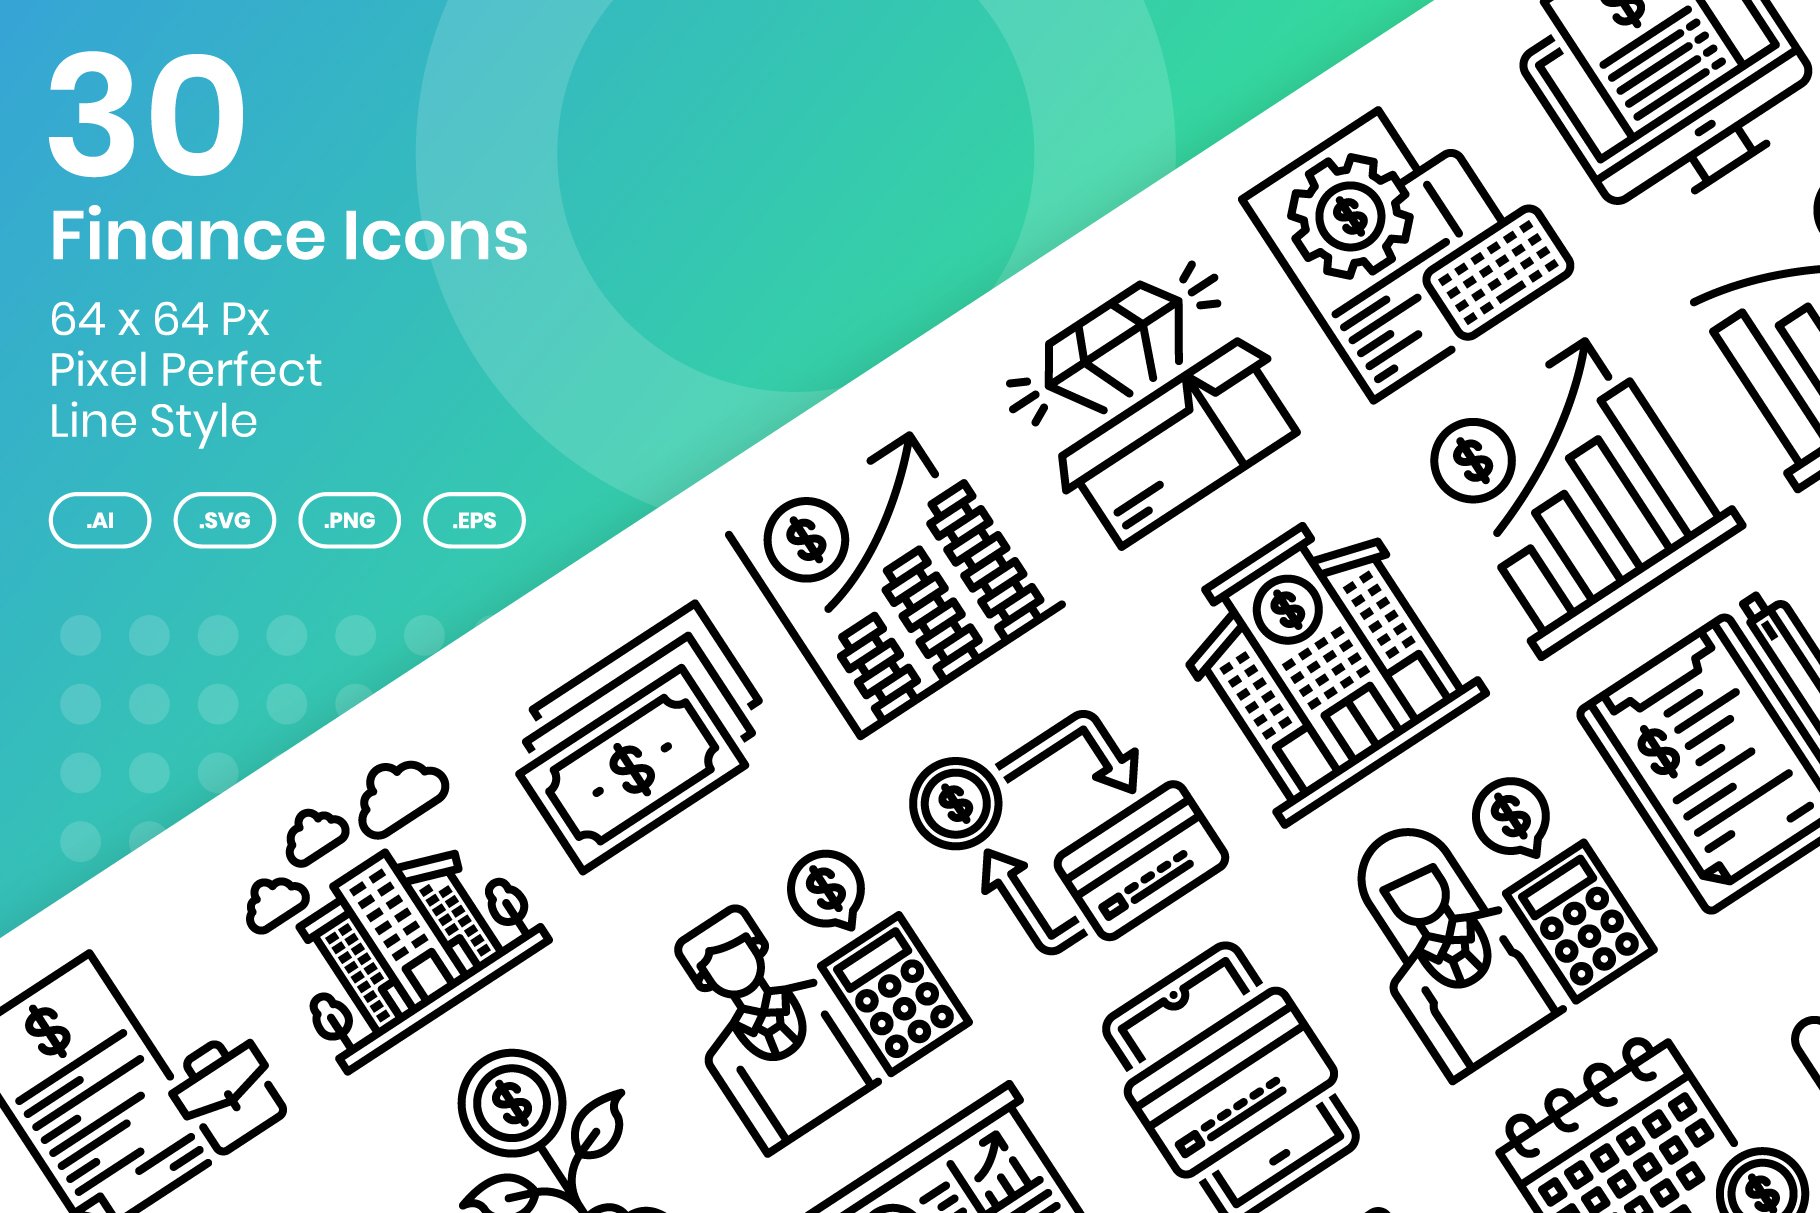 30 Finance Icons Set - Line cover image.